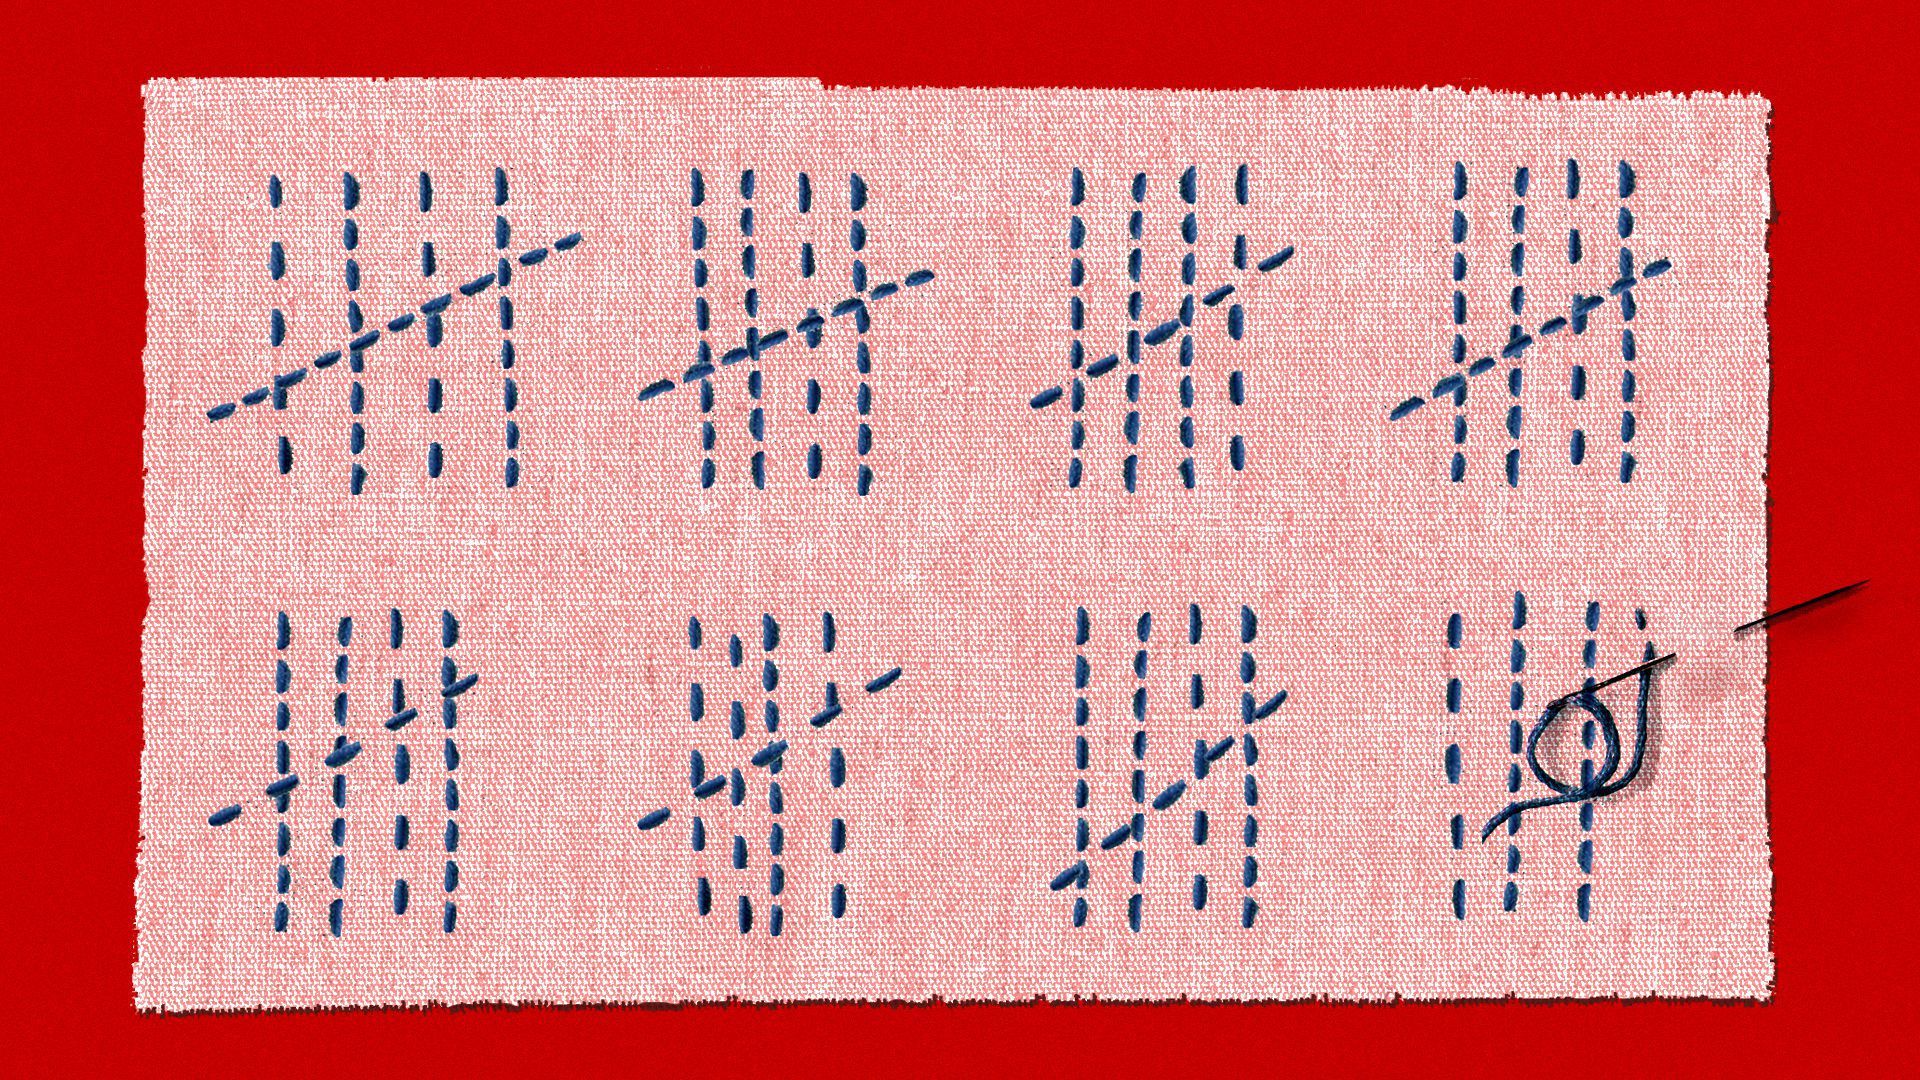 An illustration of sewing stitches. 